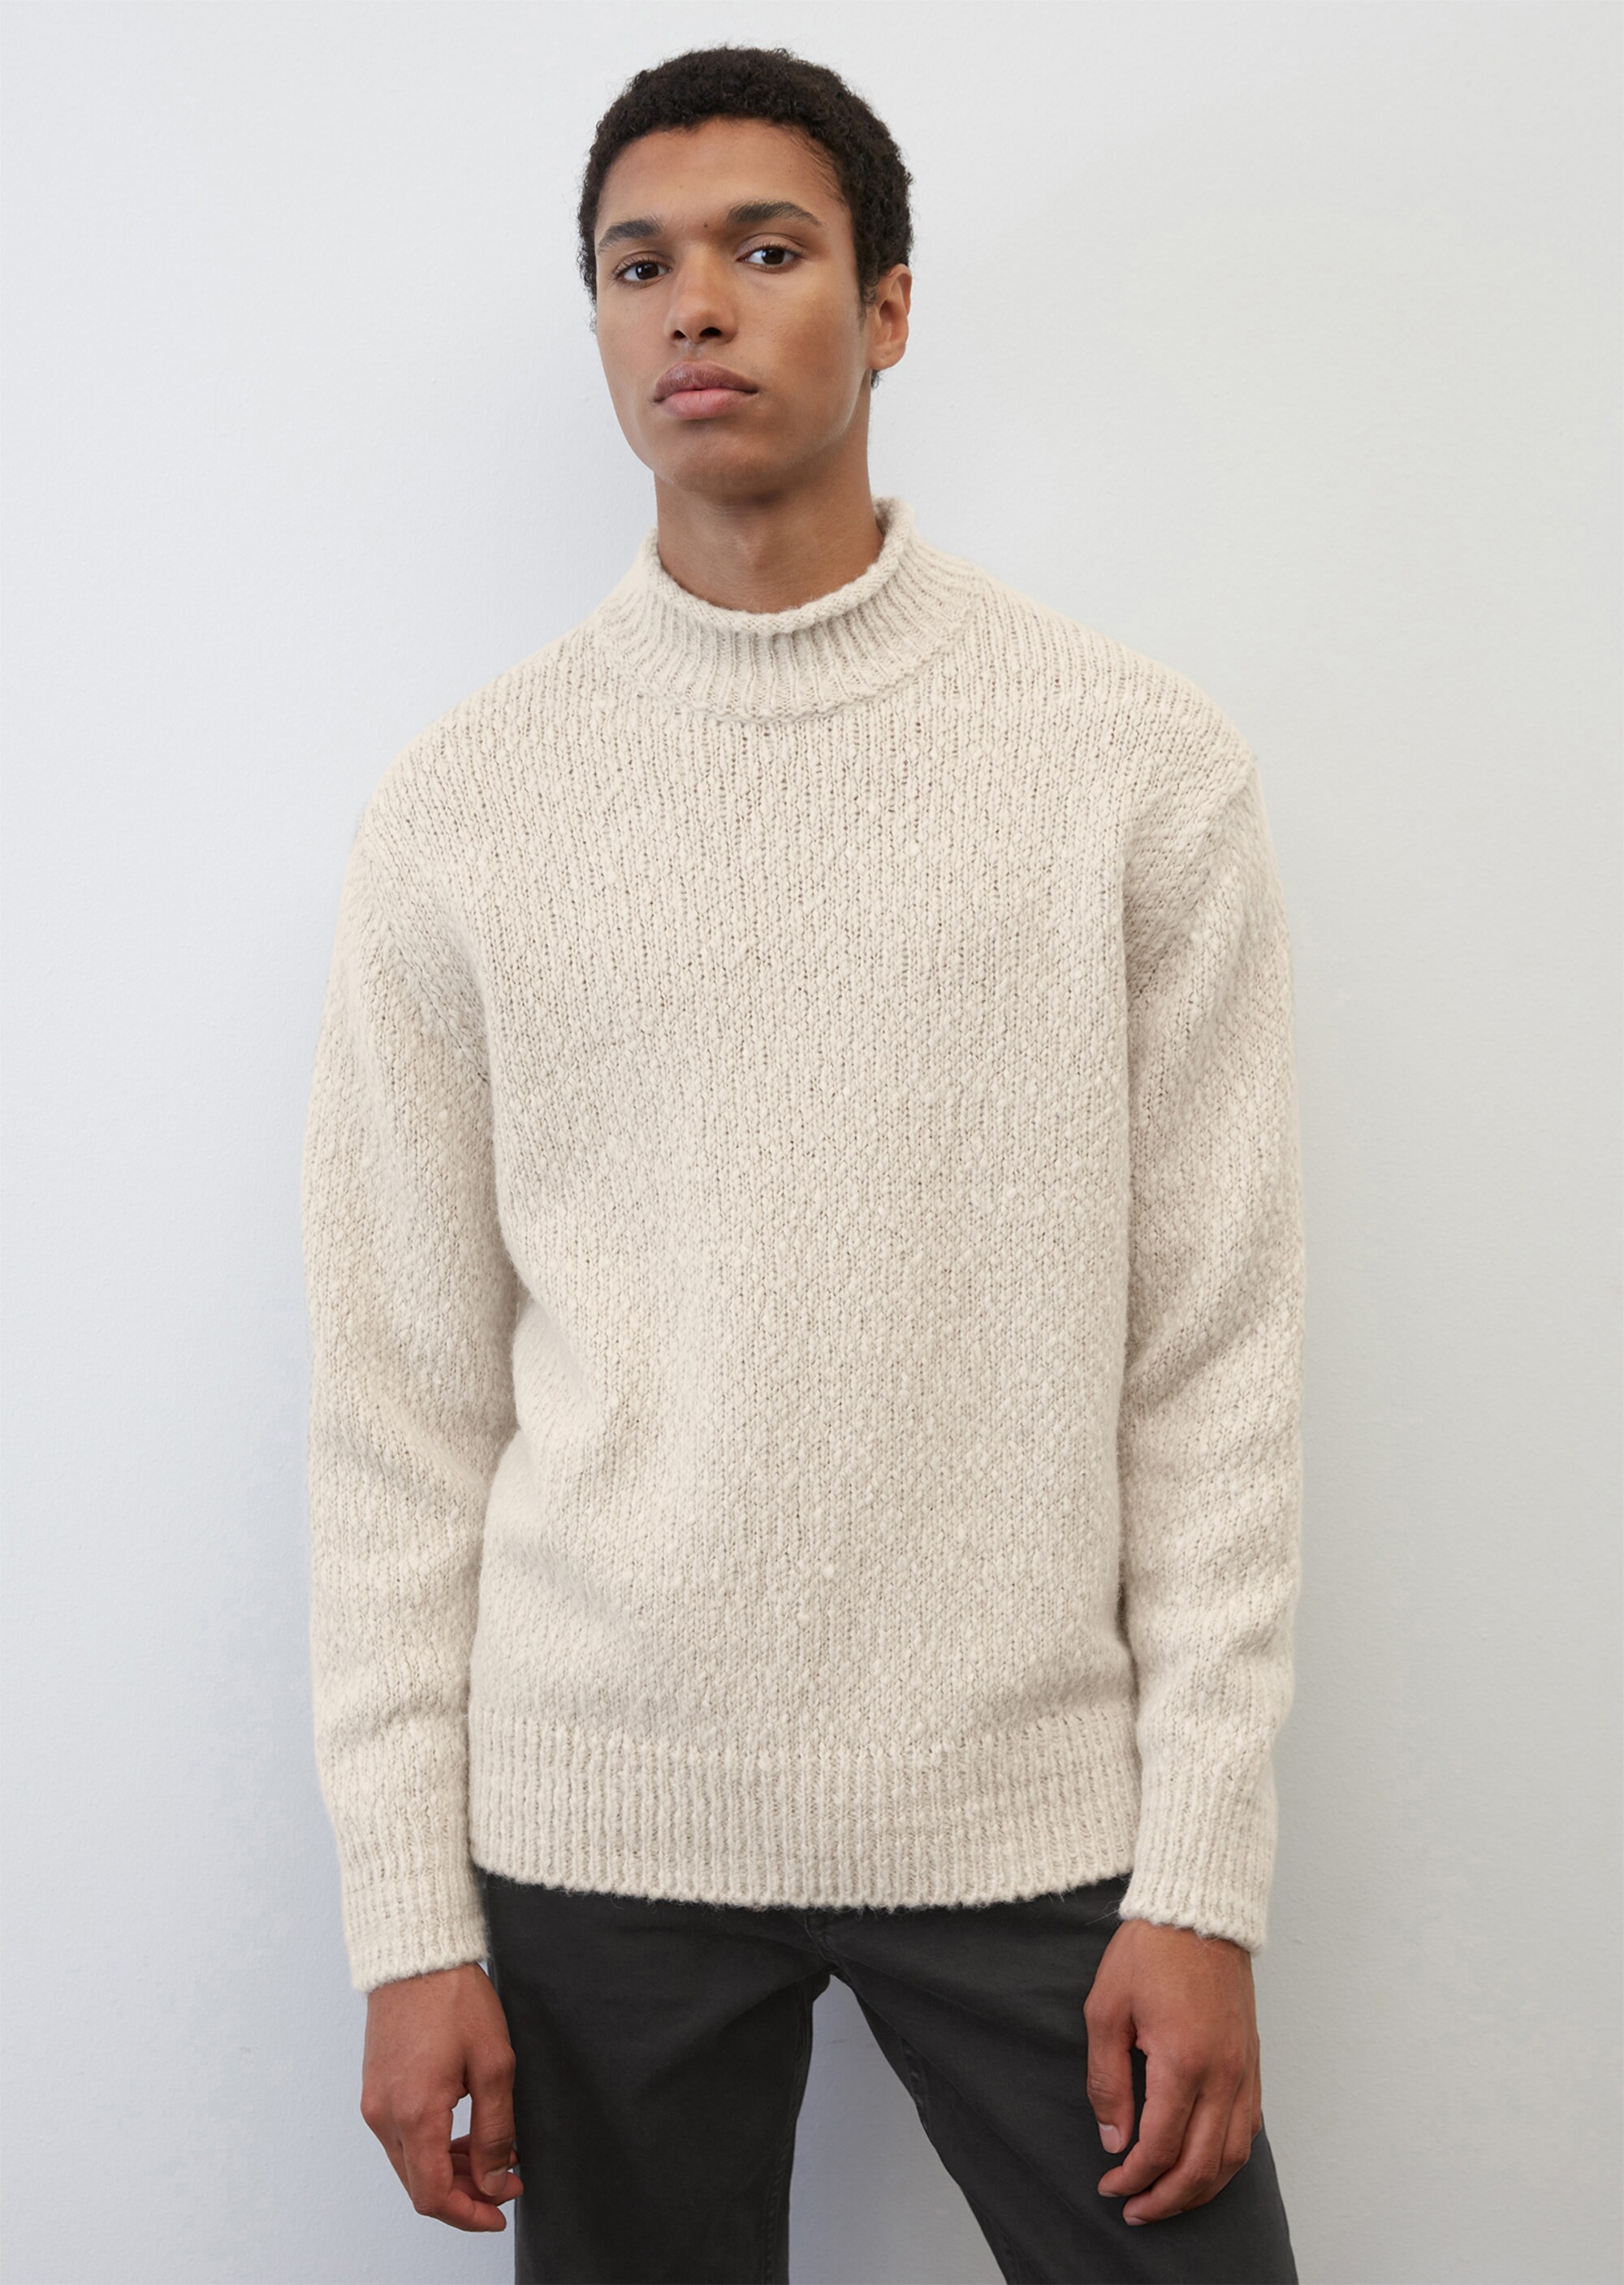 Marc O\u2019Polo Feinstrickpullover wit gestippeld casual uitstraling Mode Sweaters Marc O’Polo 